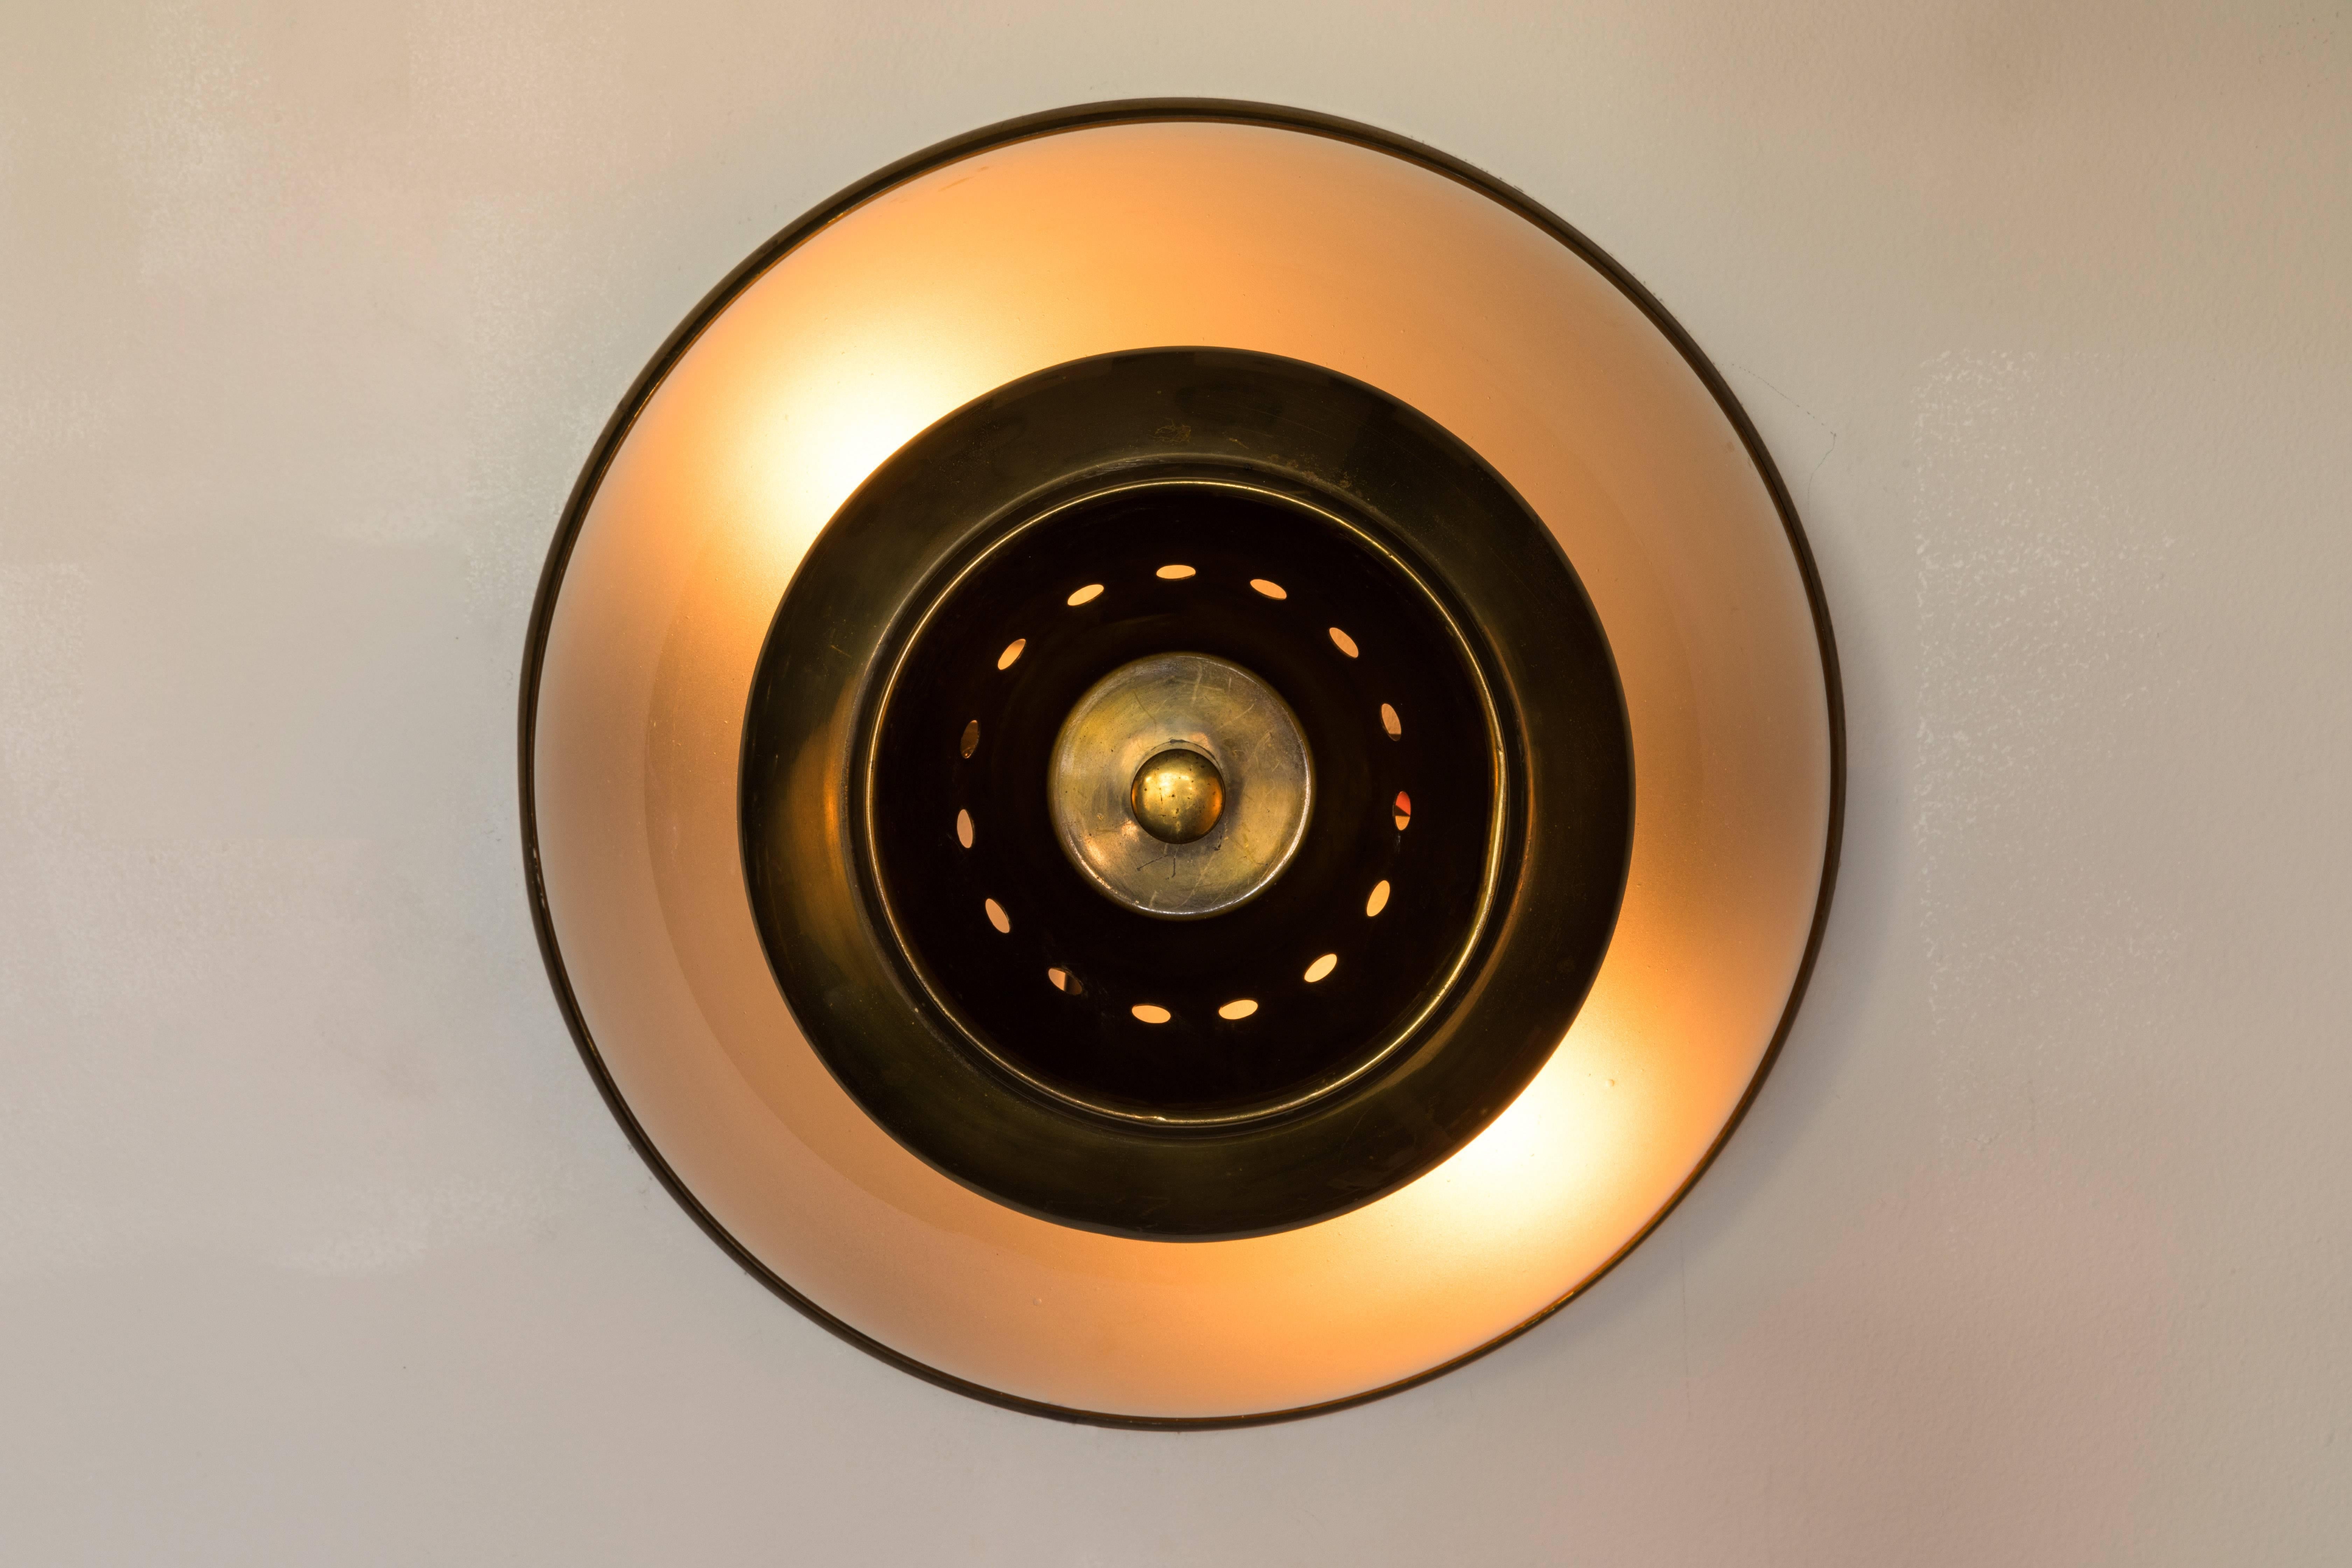 1960s Luigi Caccia Dominioni LSP3 ceiling or wall light for Azucena. Executed in handblown opaline glass and patinated brass. Azucena was one of the most innovative lighting design companies in Italy during the Mid-Century era. Their designs have